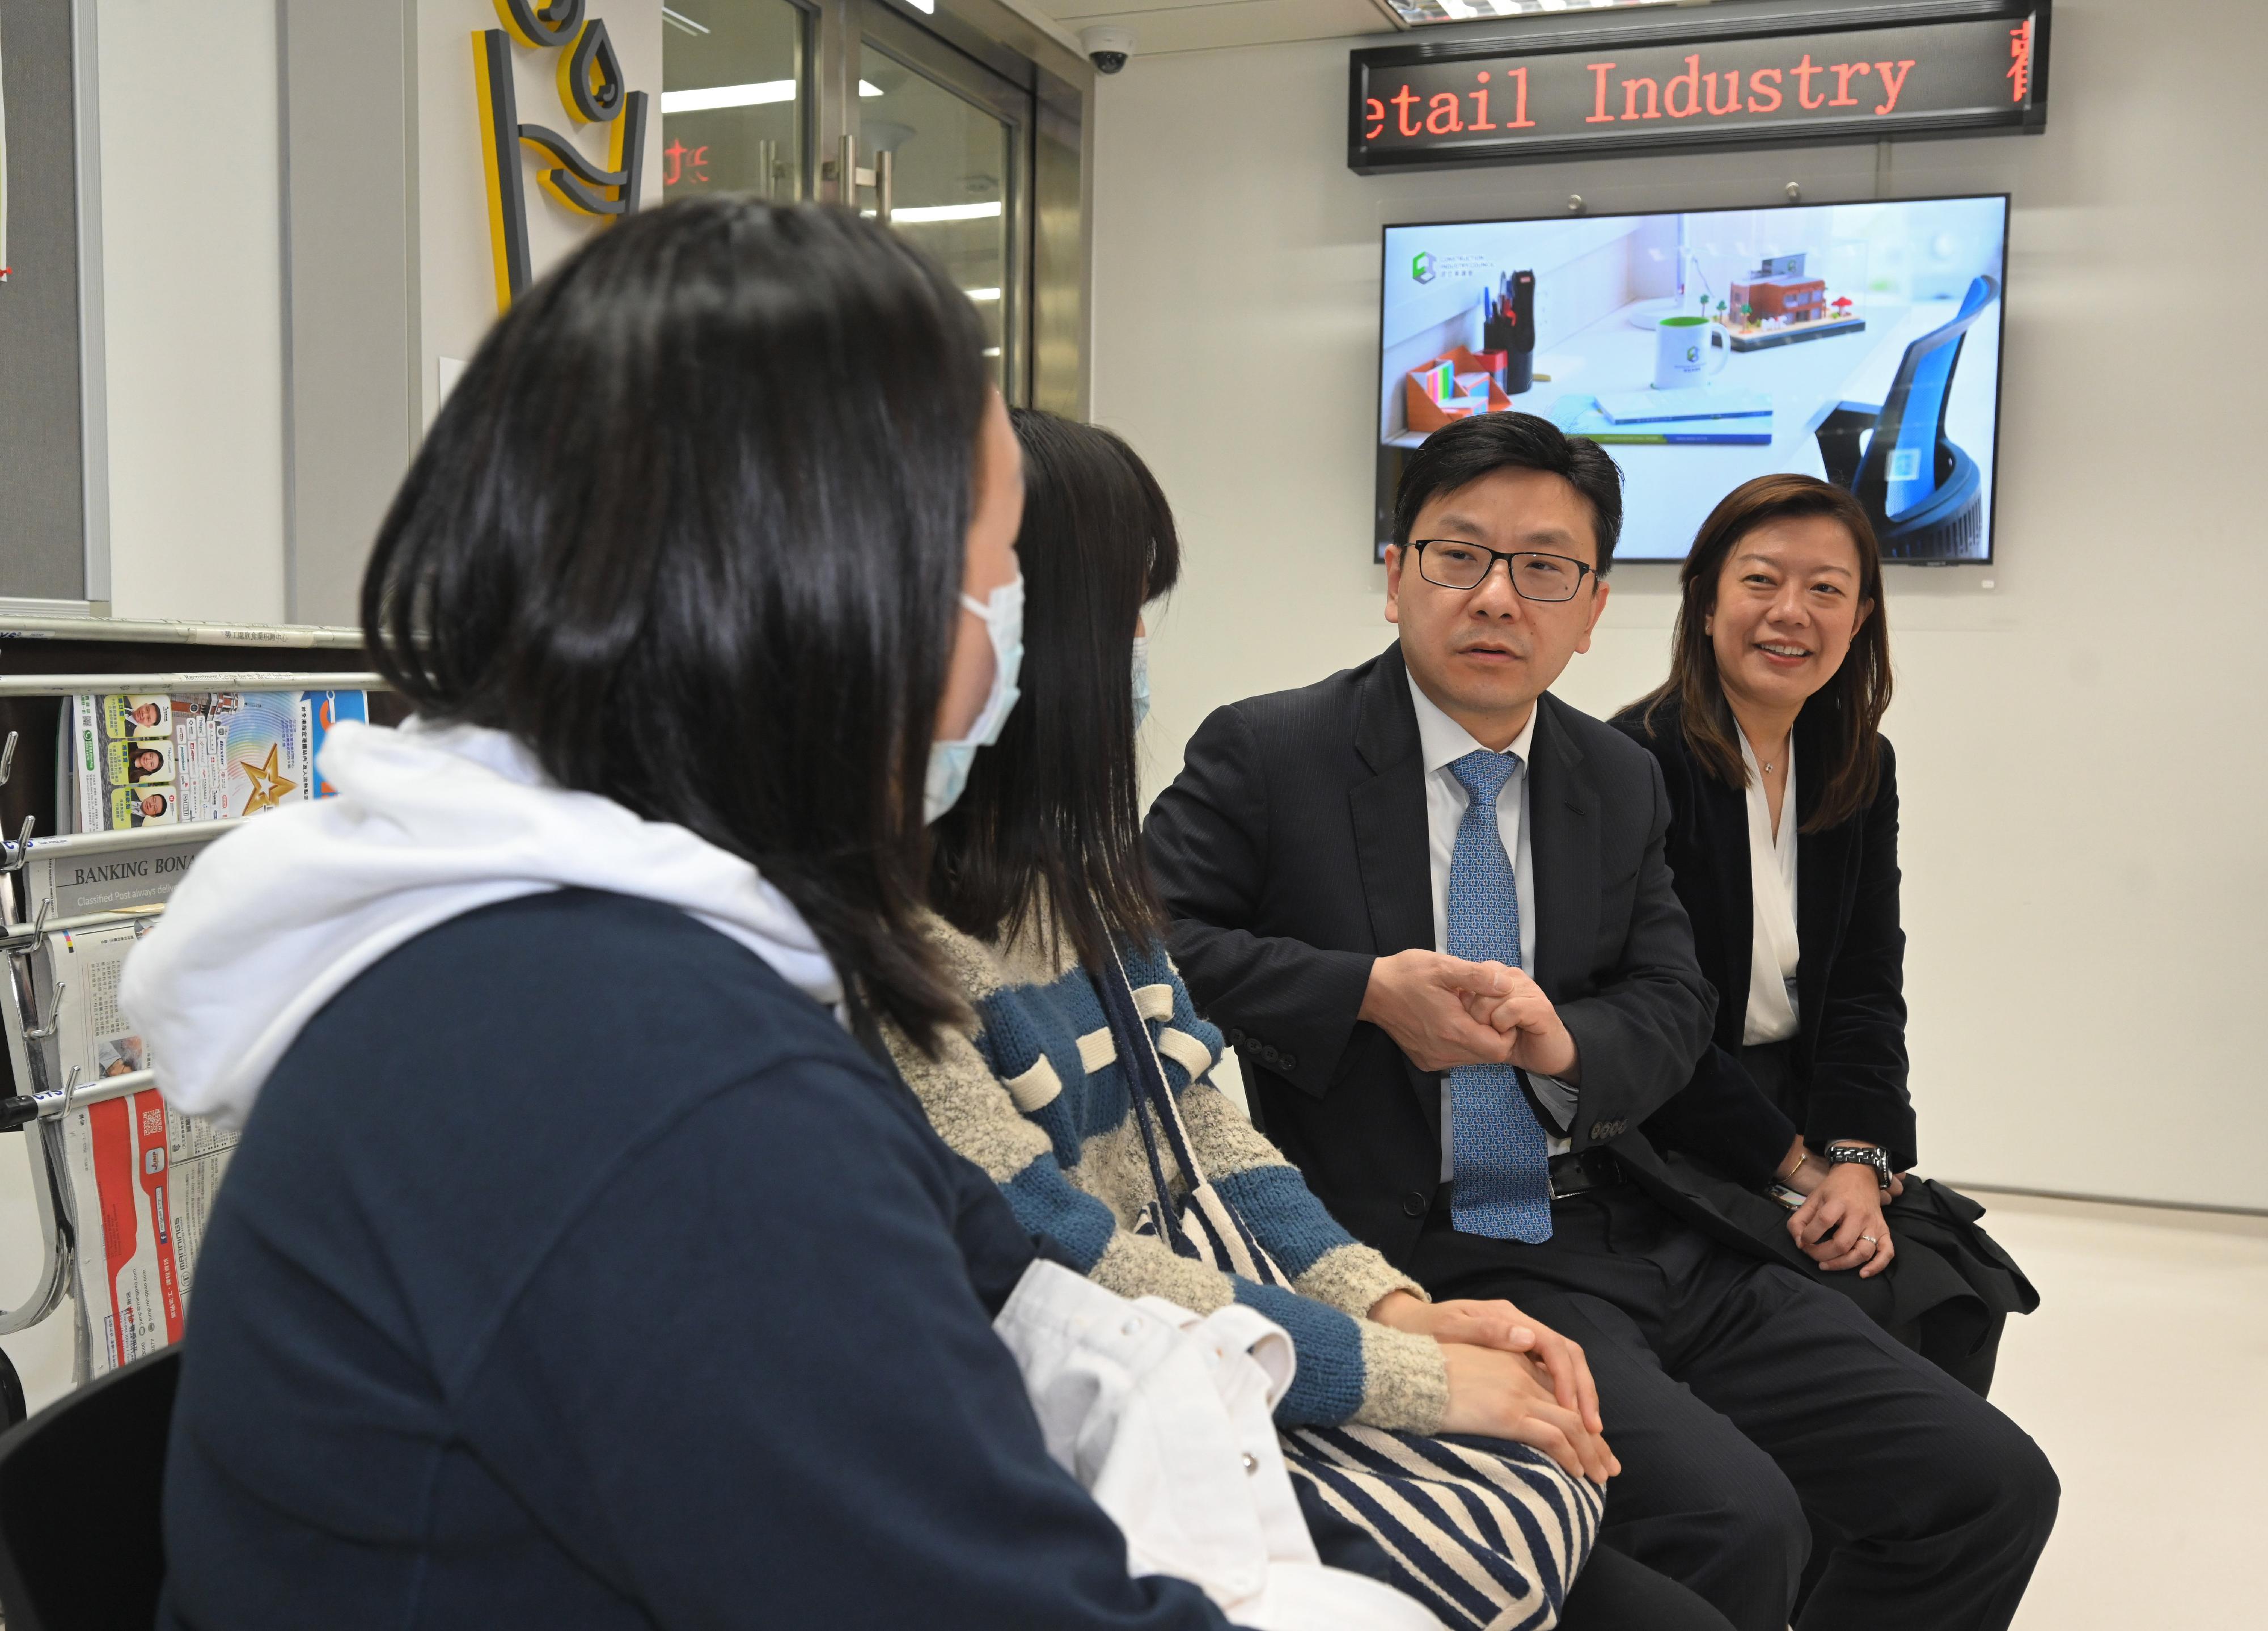 The Secretary for Labour and Welfare, Mr Chris Sun, today (March 1) visited the Recruitment Centre for the Catering Industry and the Recruitment Centre for the Retail Industry at the Treasury Building in Cheung Sha Wan to take a closer look at the enhanced employment services of the Labour Department upon resumption of economic activities following the lifting of all mandatory mask-wearing requirements in Hong Kong. The Commissioner for Labour, Ms May Chan, also joined the visit. Photo shows Mr Sun (second right) and Ms Chan (first right) listening to job seekers sharing their job searching experiences.